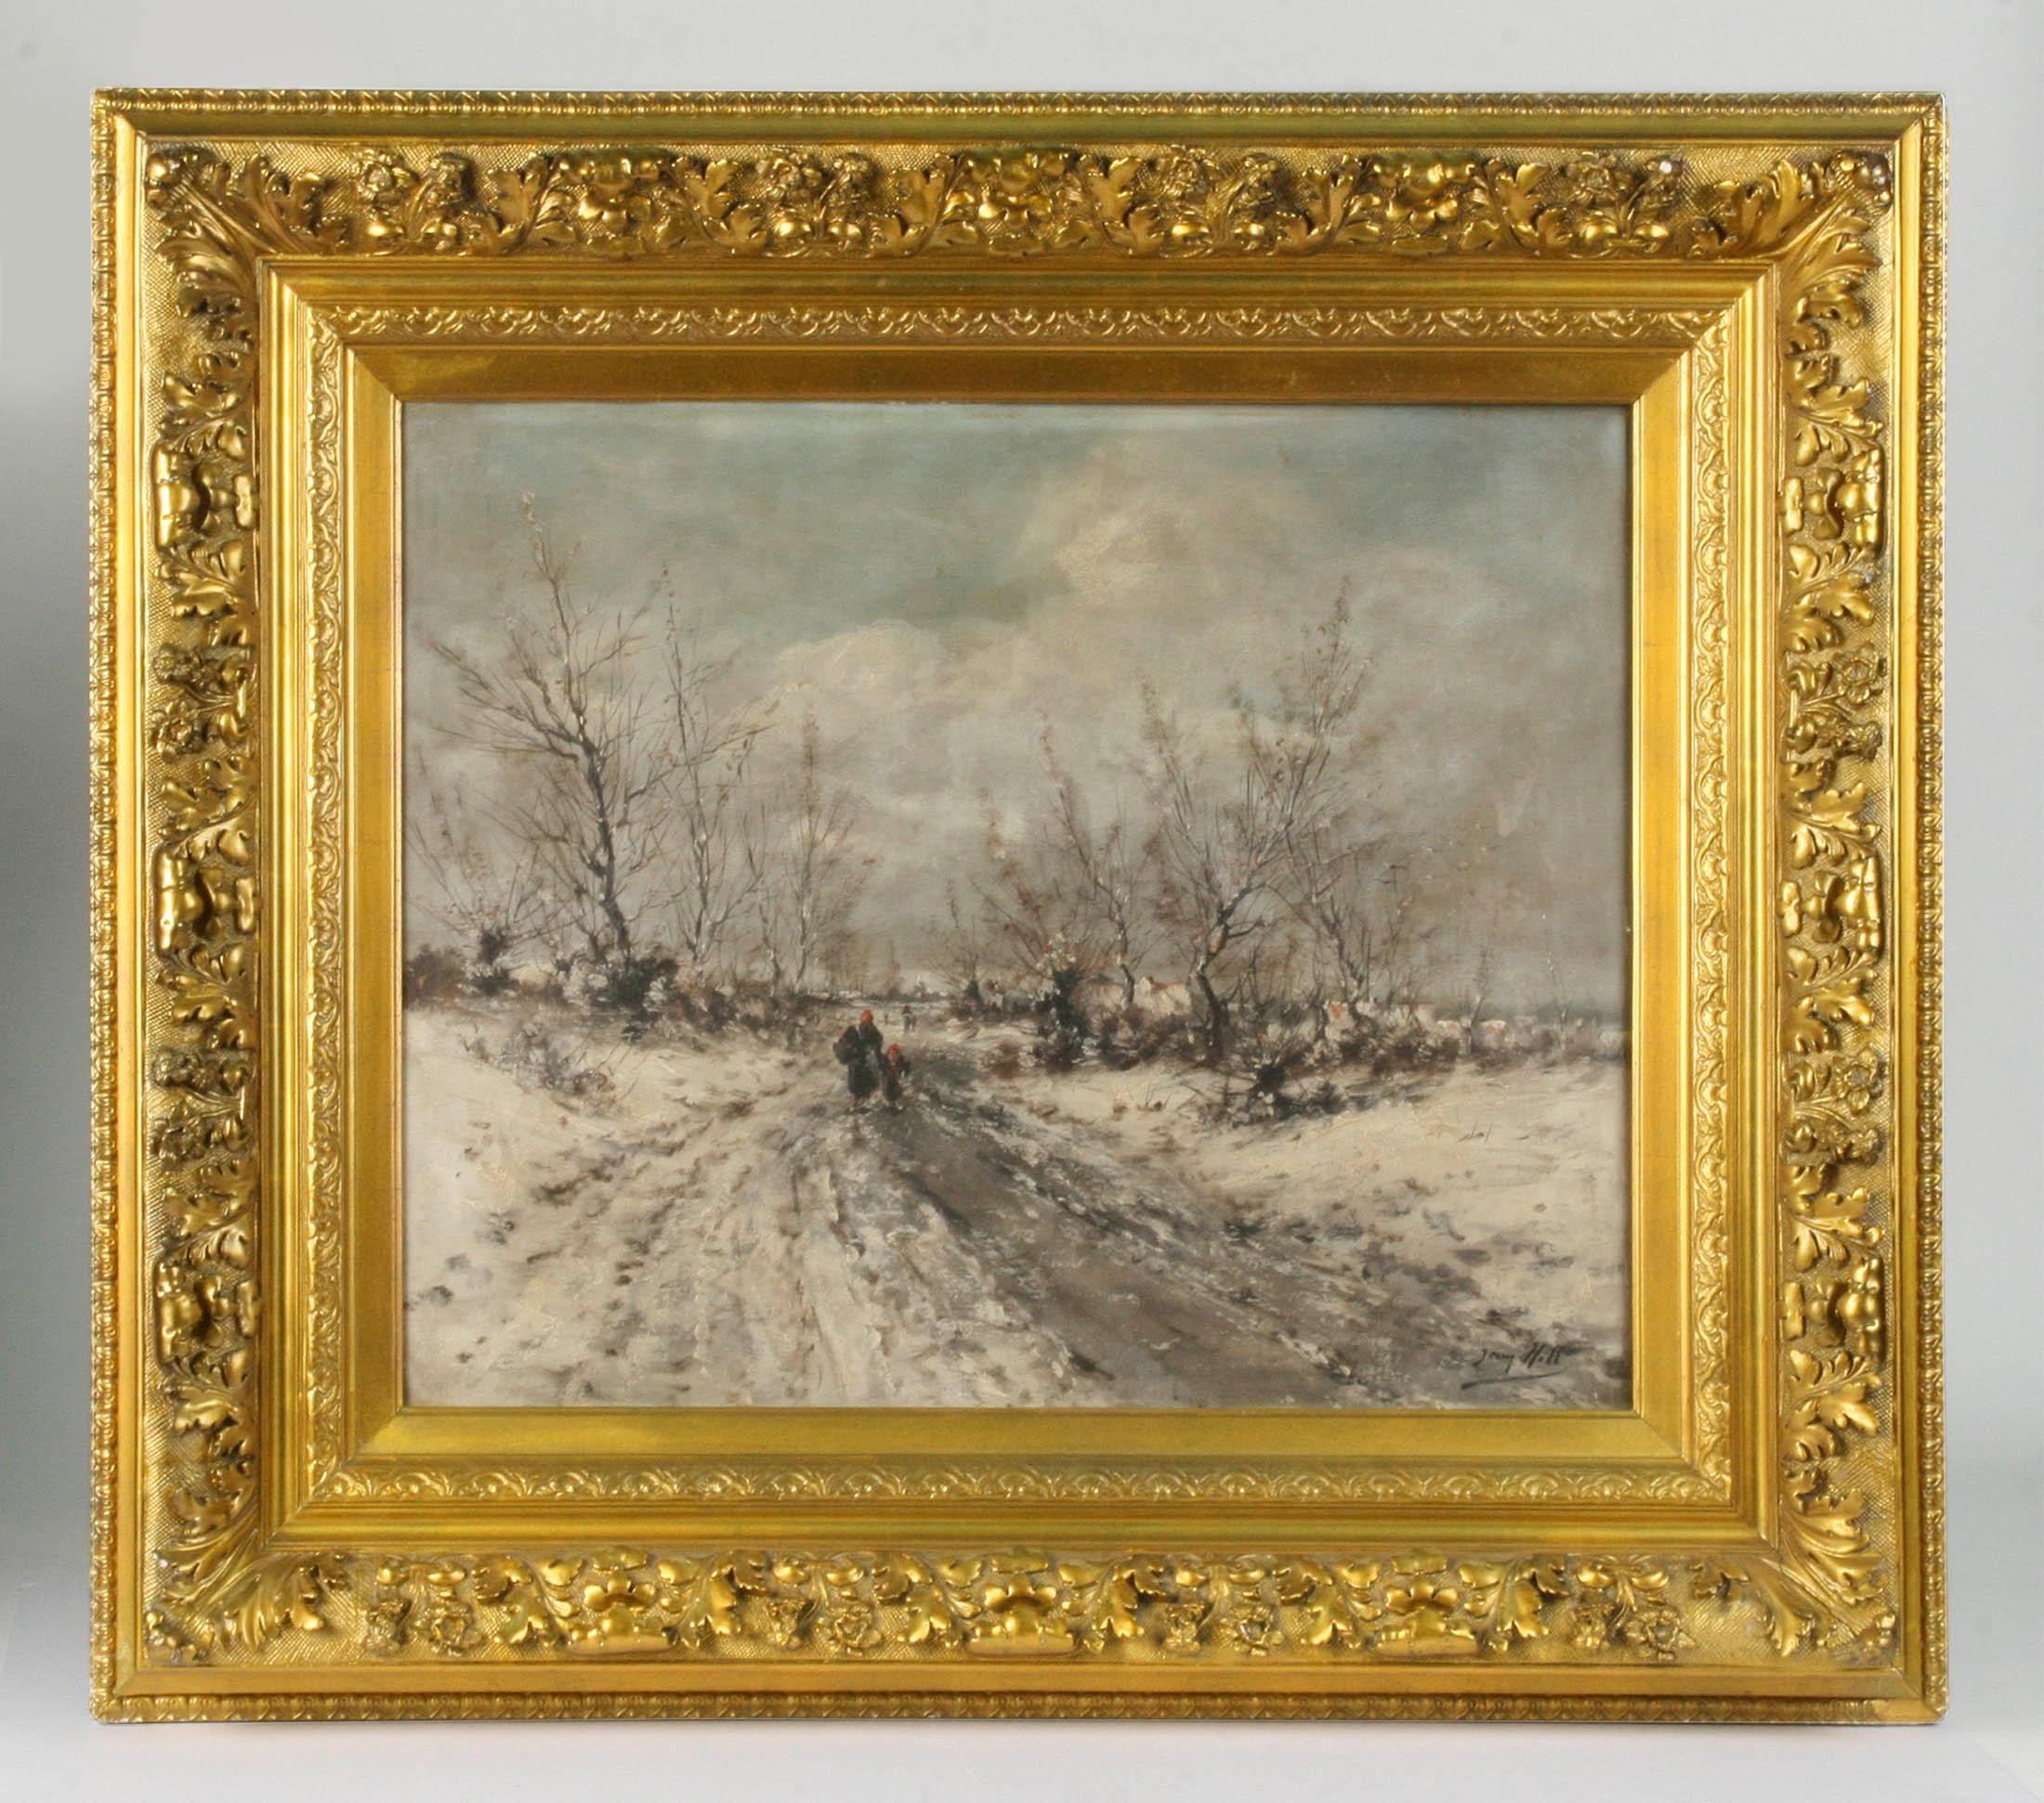 Powerful painting, winter landscape with small figures, painted by Jean Hill.
He was a Flemish painter who lived in the 19th century in the city of Ostend. He painted landscapes, cityscapes and beach scenes.

The painting is made of plaster on